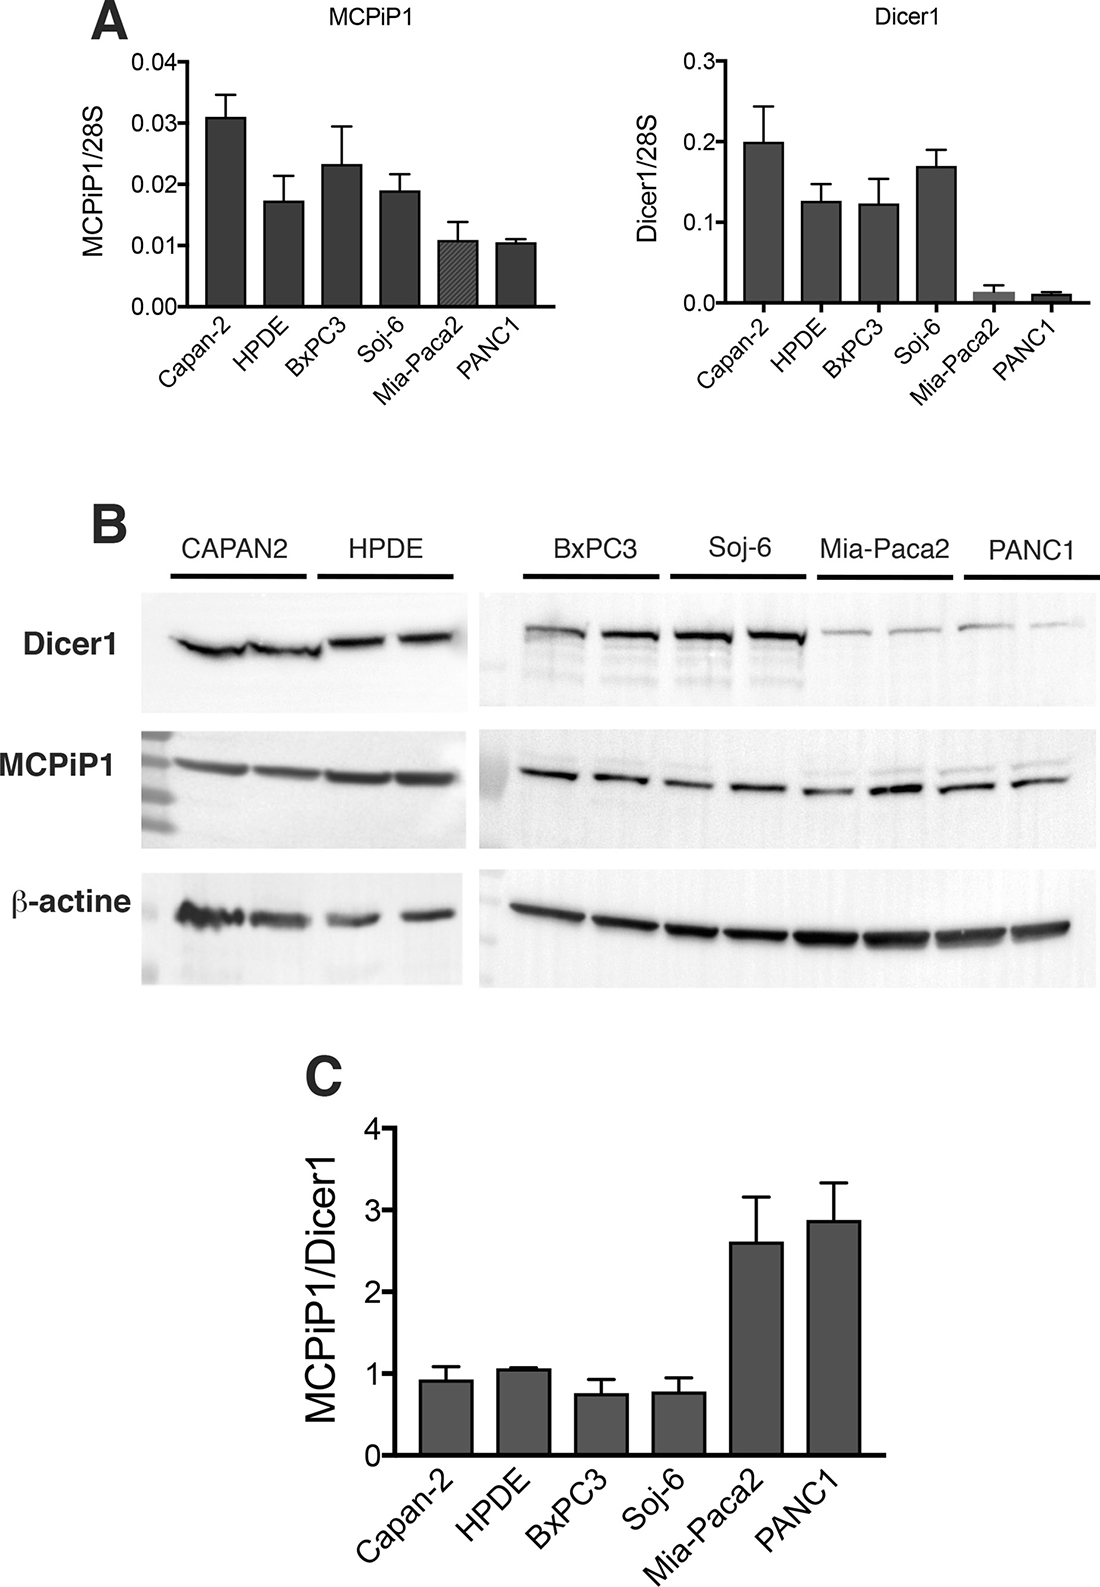 Expression of Dicer1 and MCPiP1 in tumoral pancreatic cell lines.